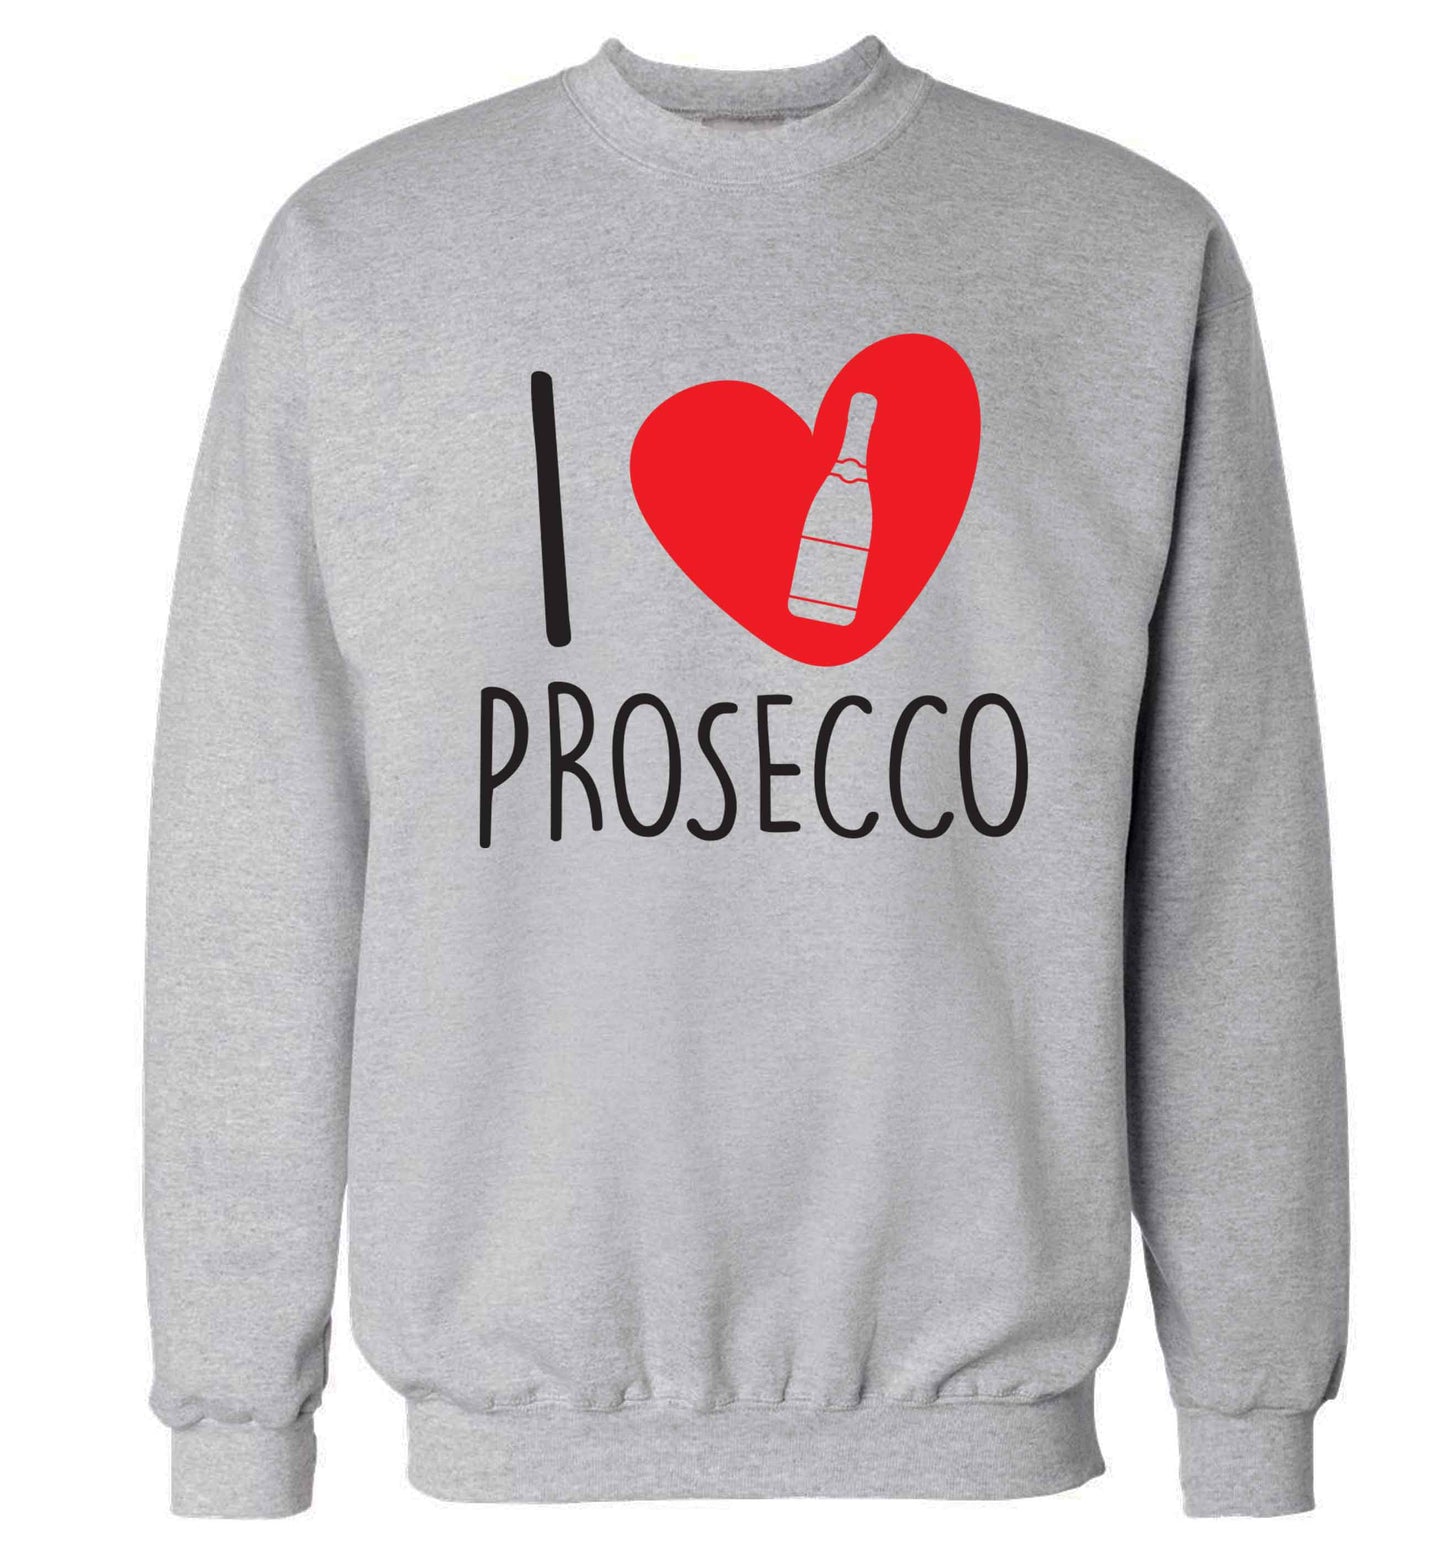 I love prosecco Adult's unisex grey Sweater 2XL